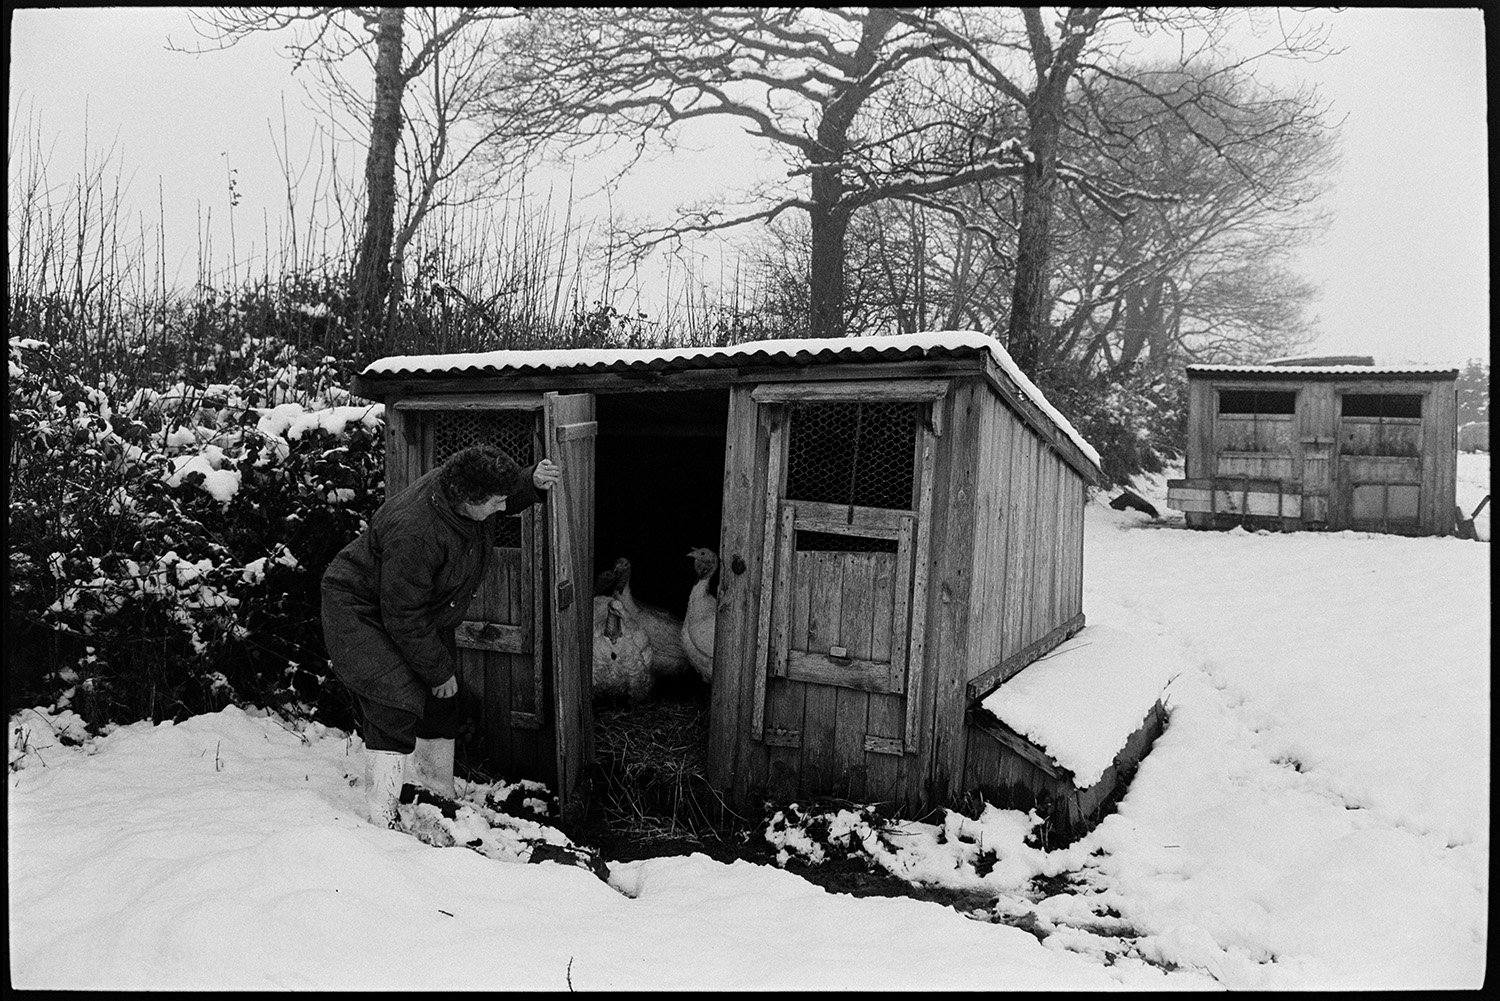 Snow, feeding ducks and checking sheep in snow, poultry house. 
[Mrs Irwin checking turkeys in a wooden poultry shed in a snow covered field at Upcott, Dolton.]